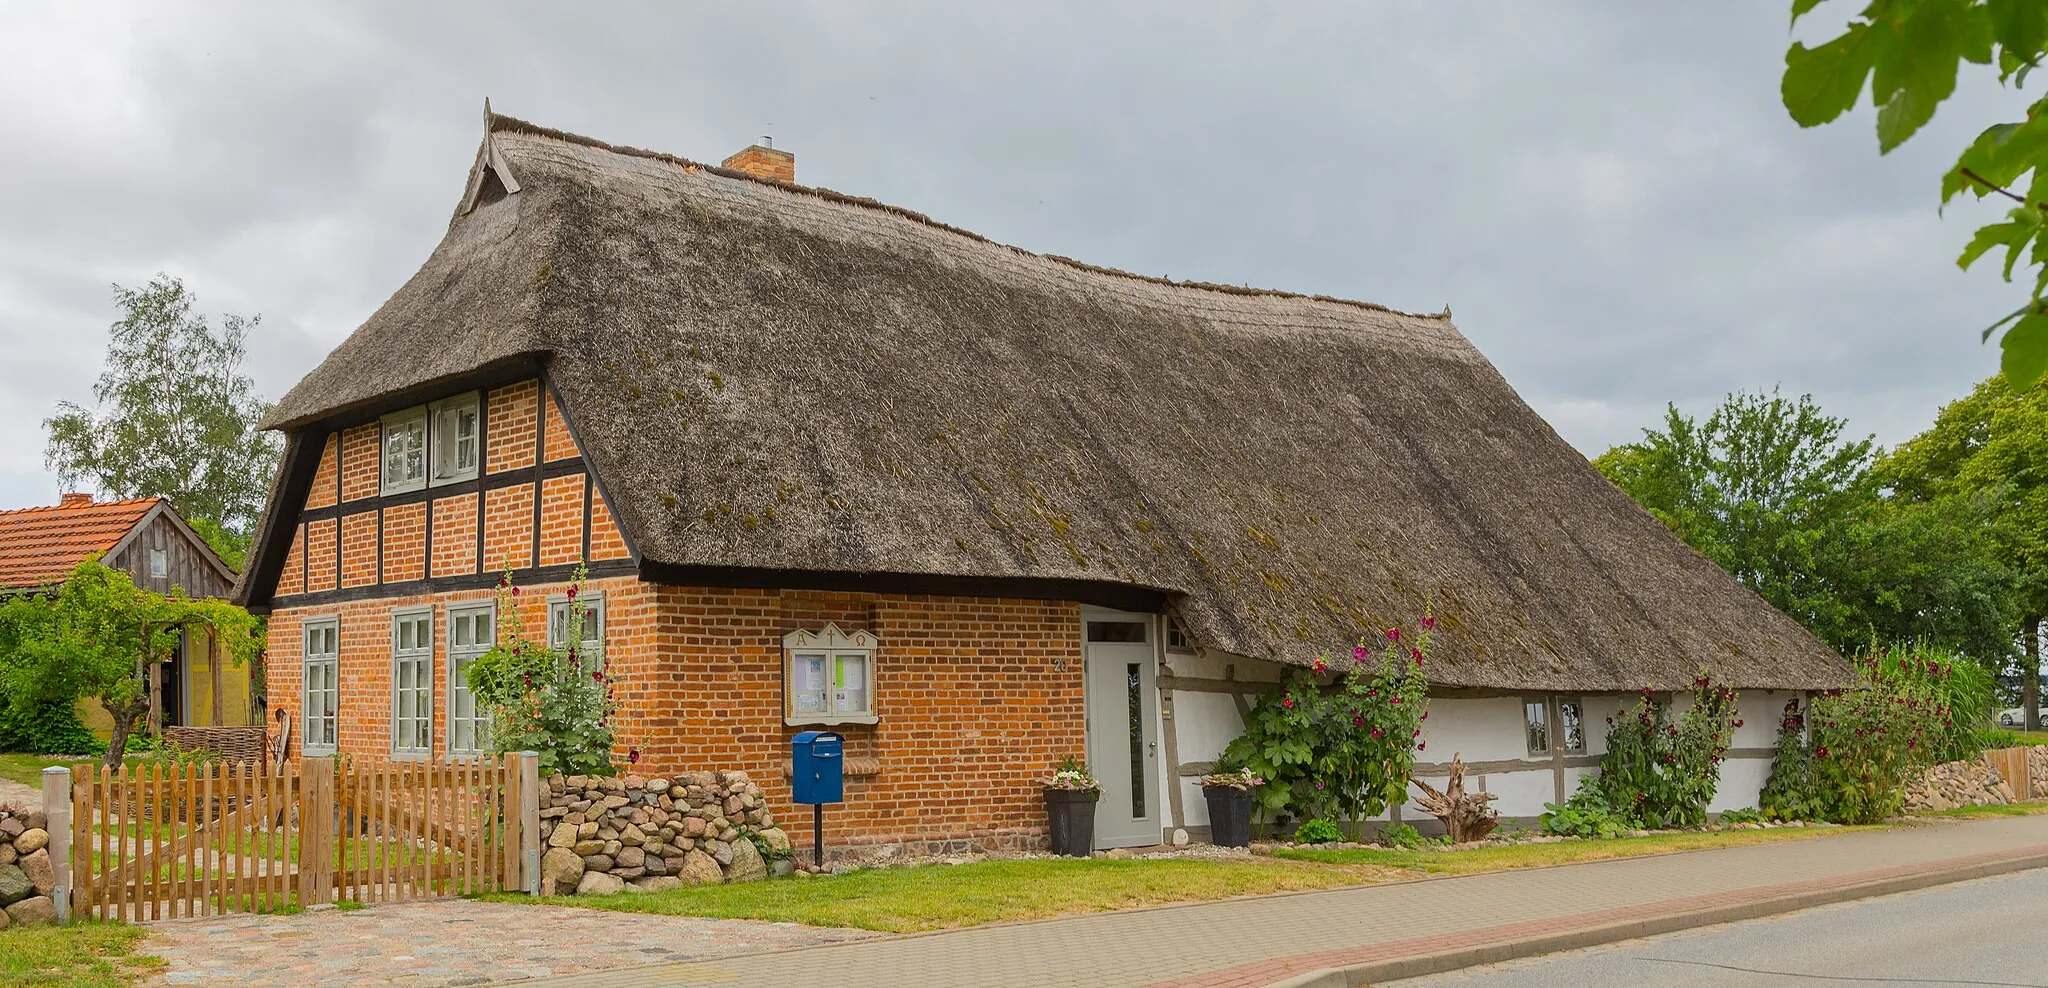 Photo showing: Low German house 20 Beach Street (Strandstraße 20) in Pepelow, district of Am Salzhaff, Landkreis Rostock, Mecklenburg-Western Pomerania, Germany. The building is a listed cultural heritage monument.